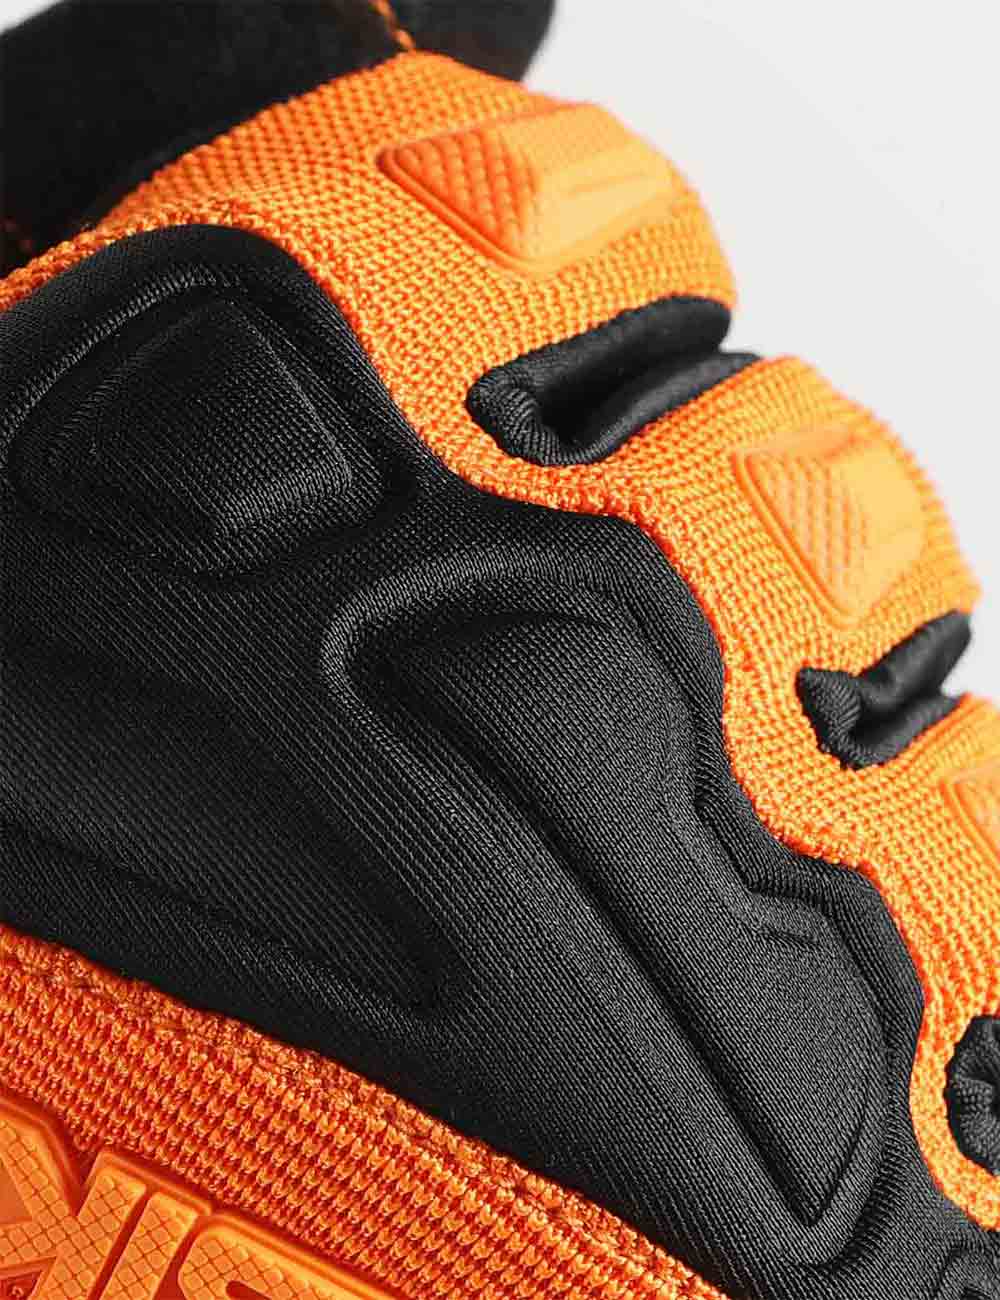 INBIKE Breathable MTB Gloves with Padding